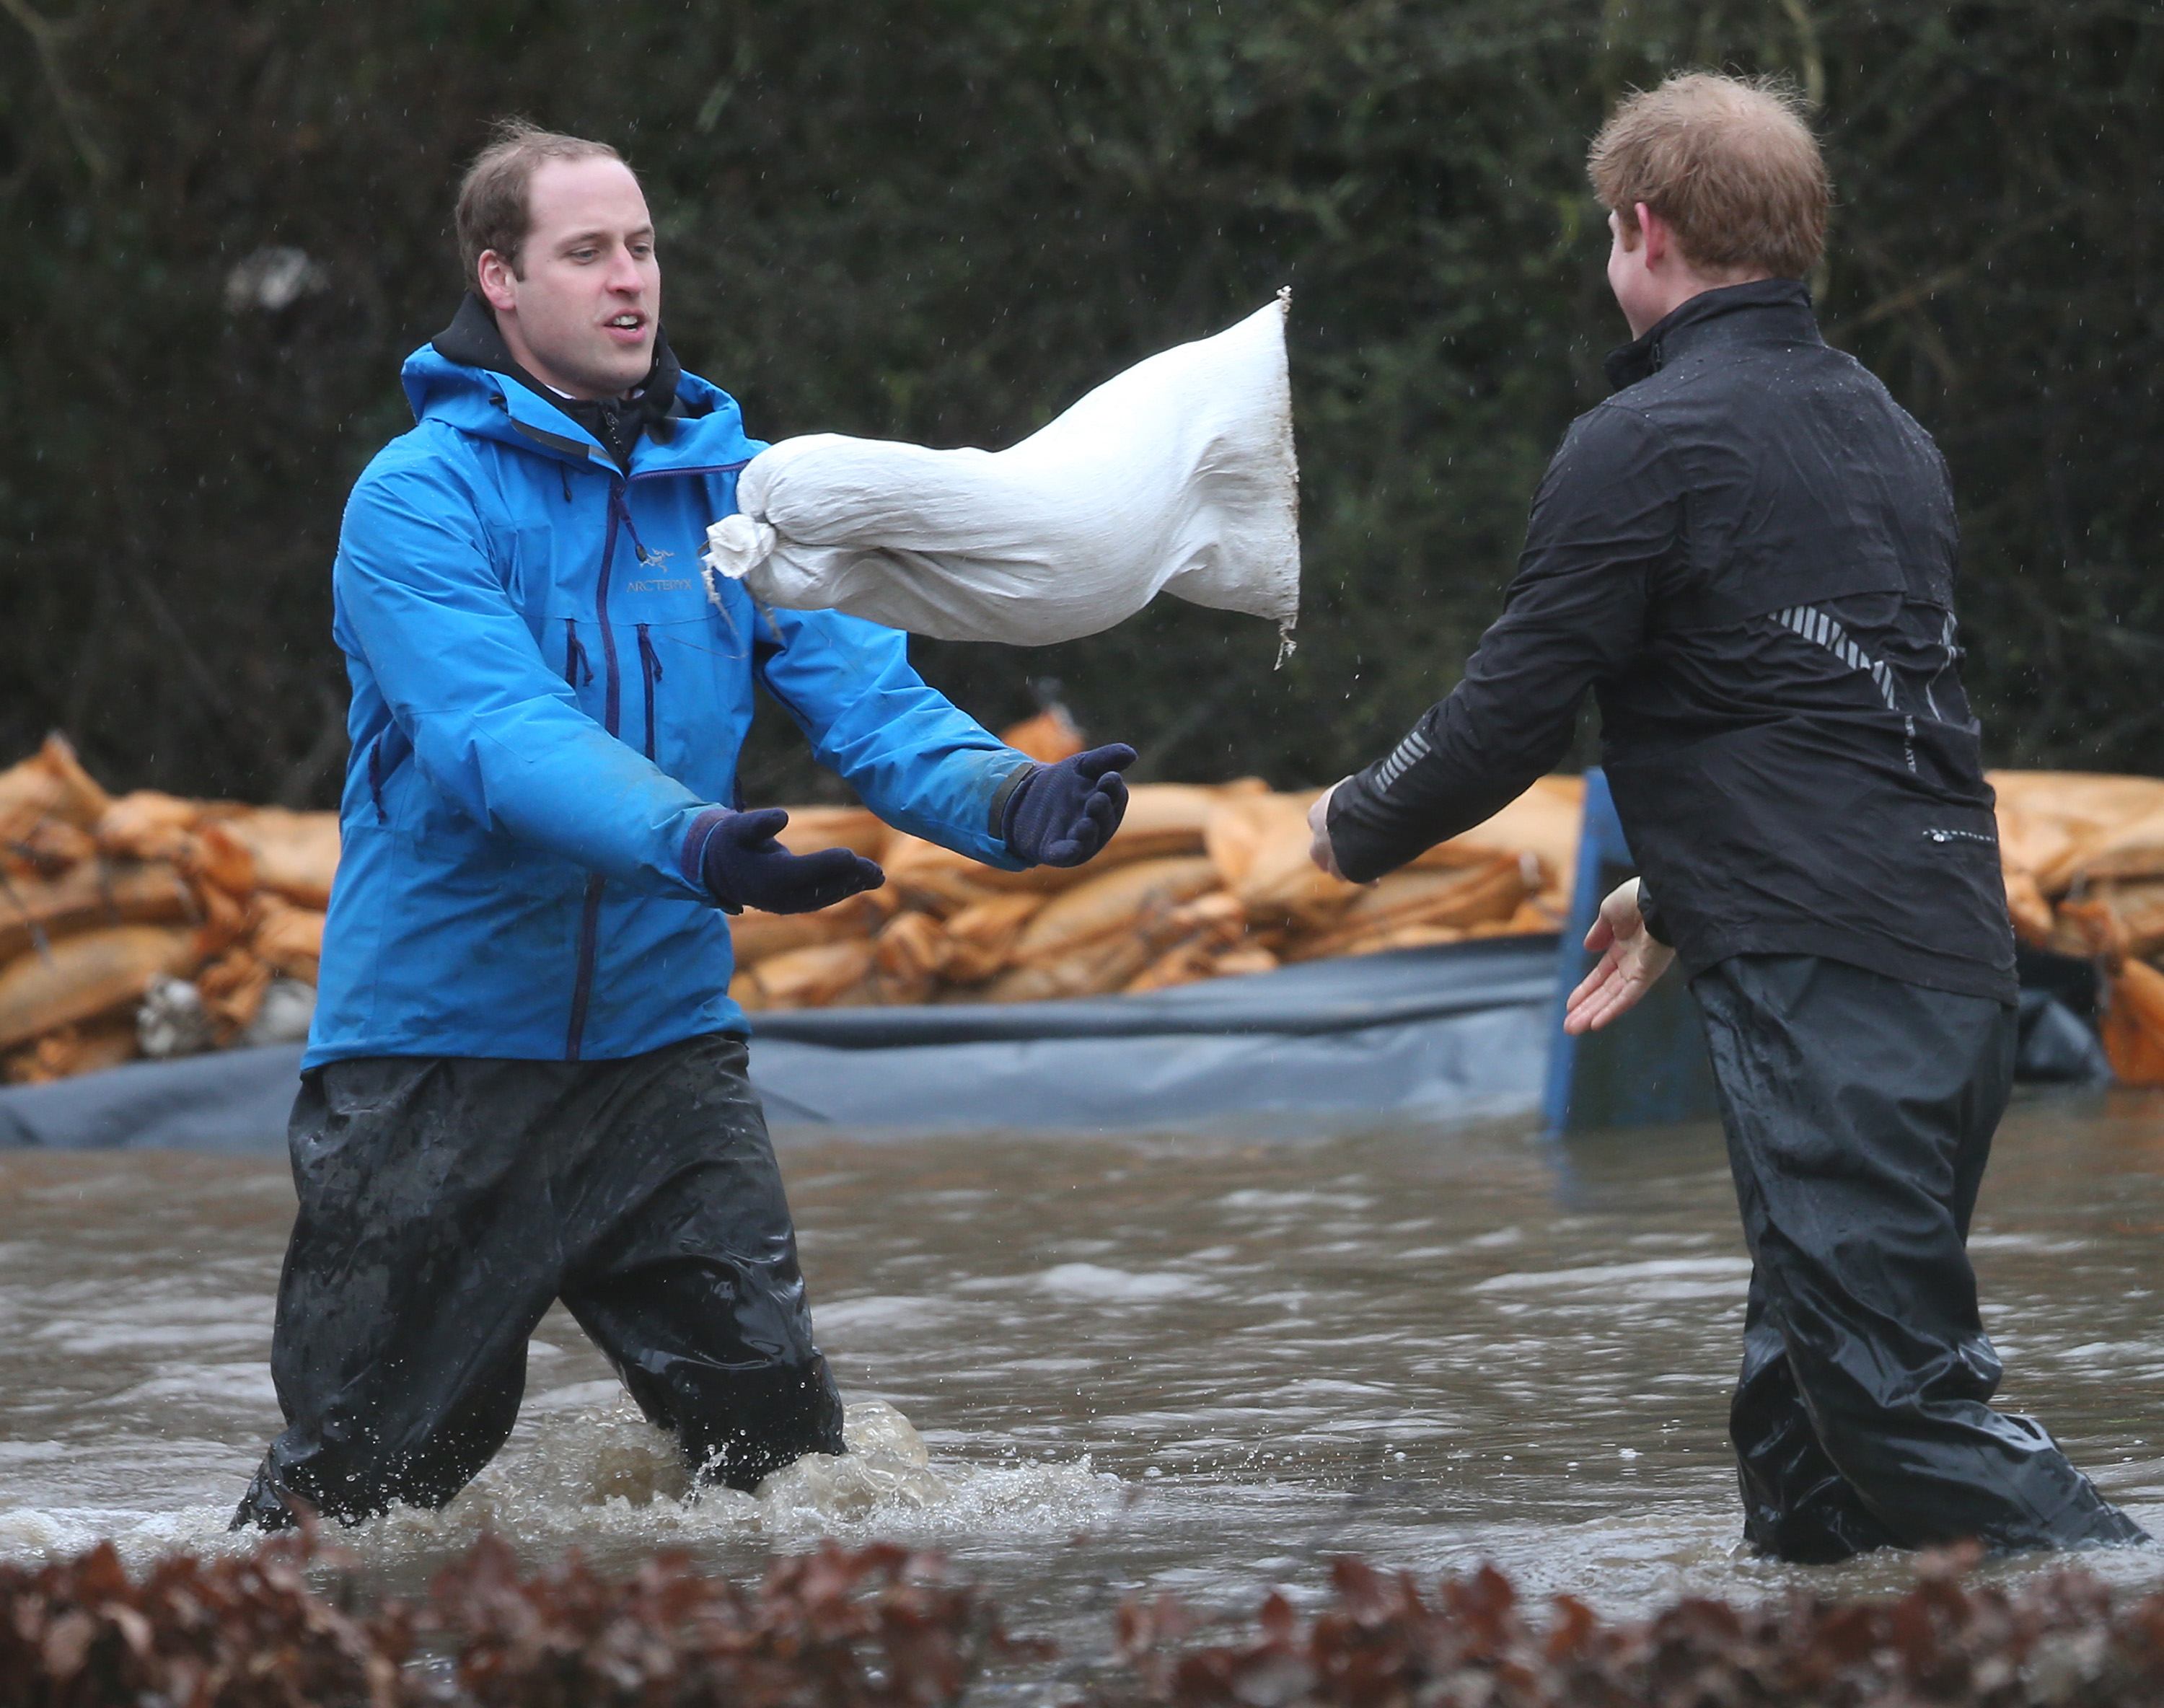 Prince William, Duke of Cambridge (L) catches a sandbag thrown by his brother Prince Harry as they build a flood wall